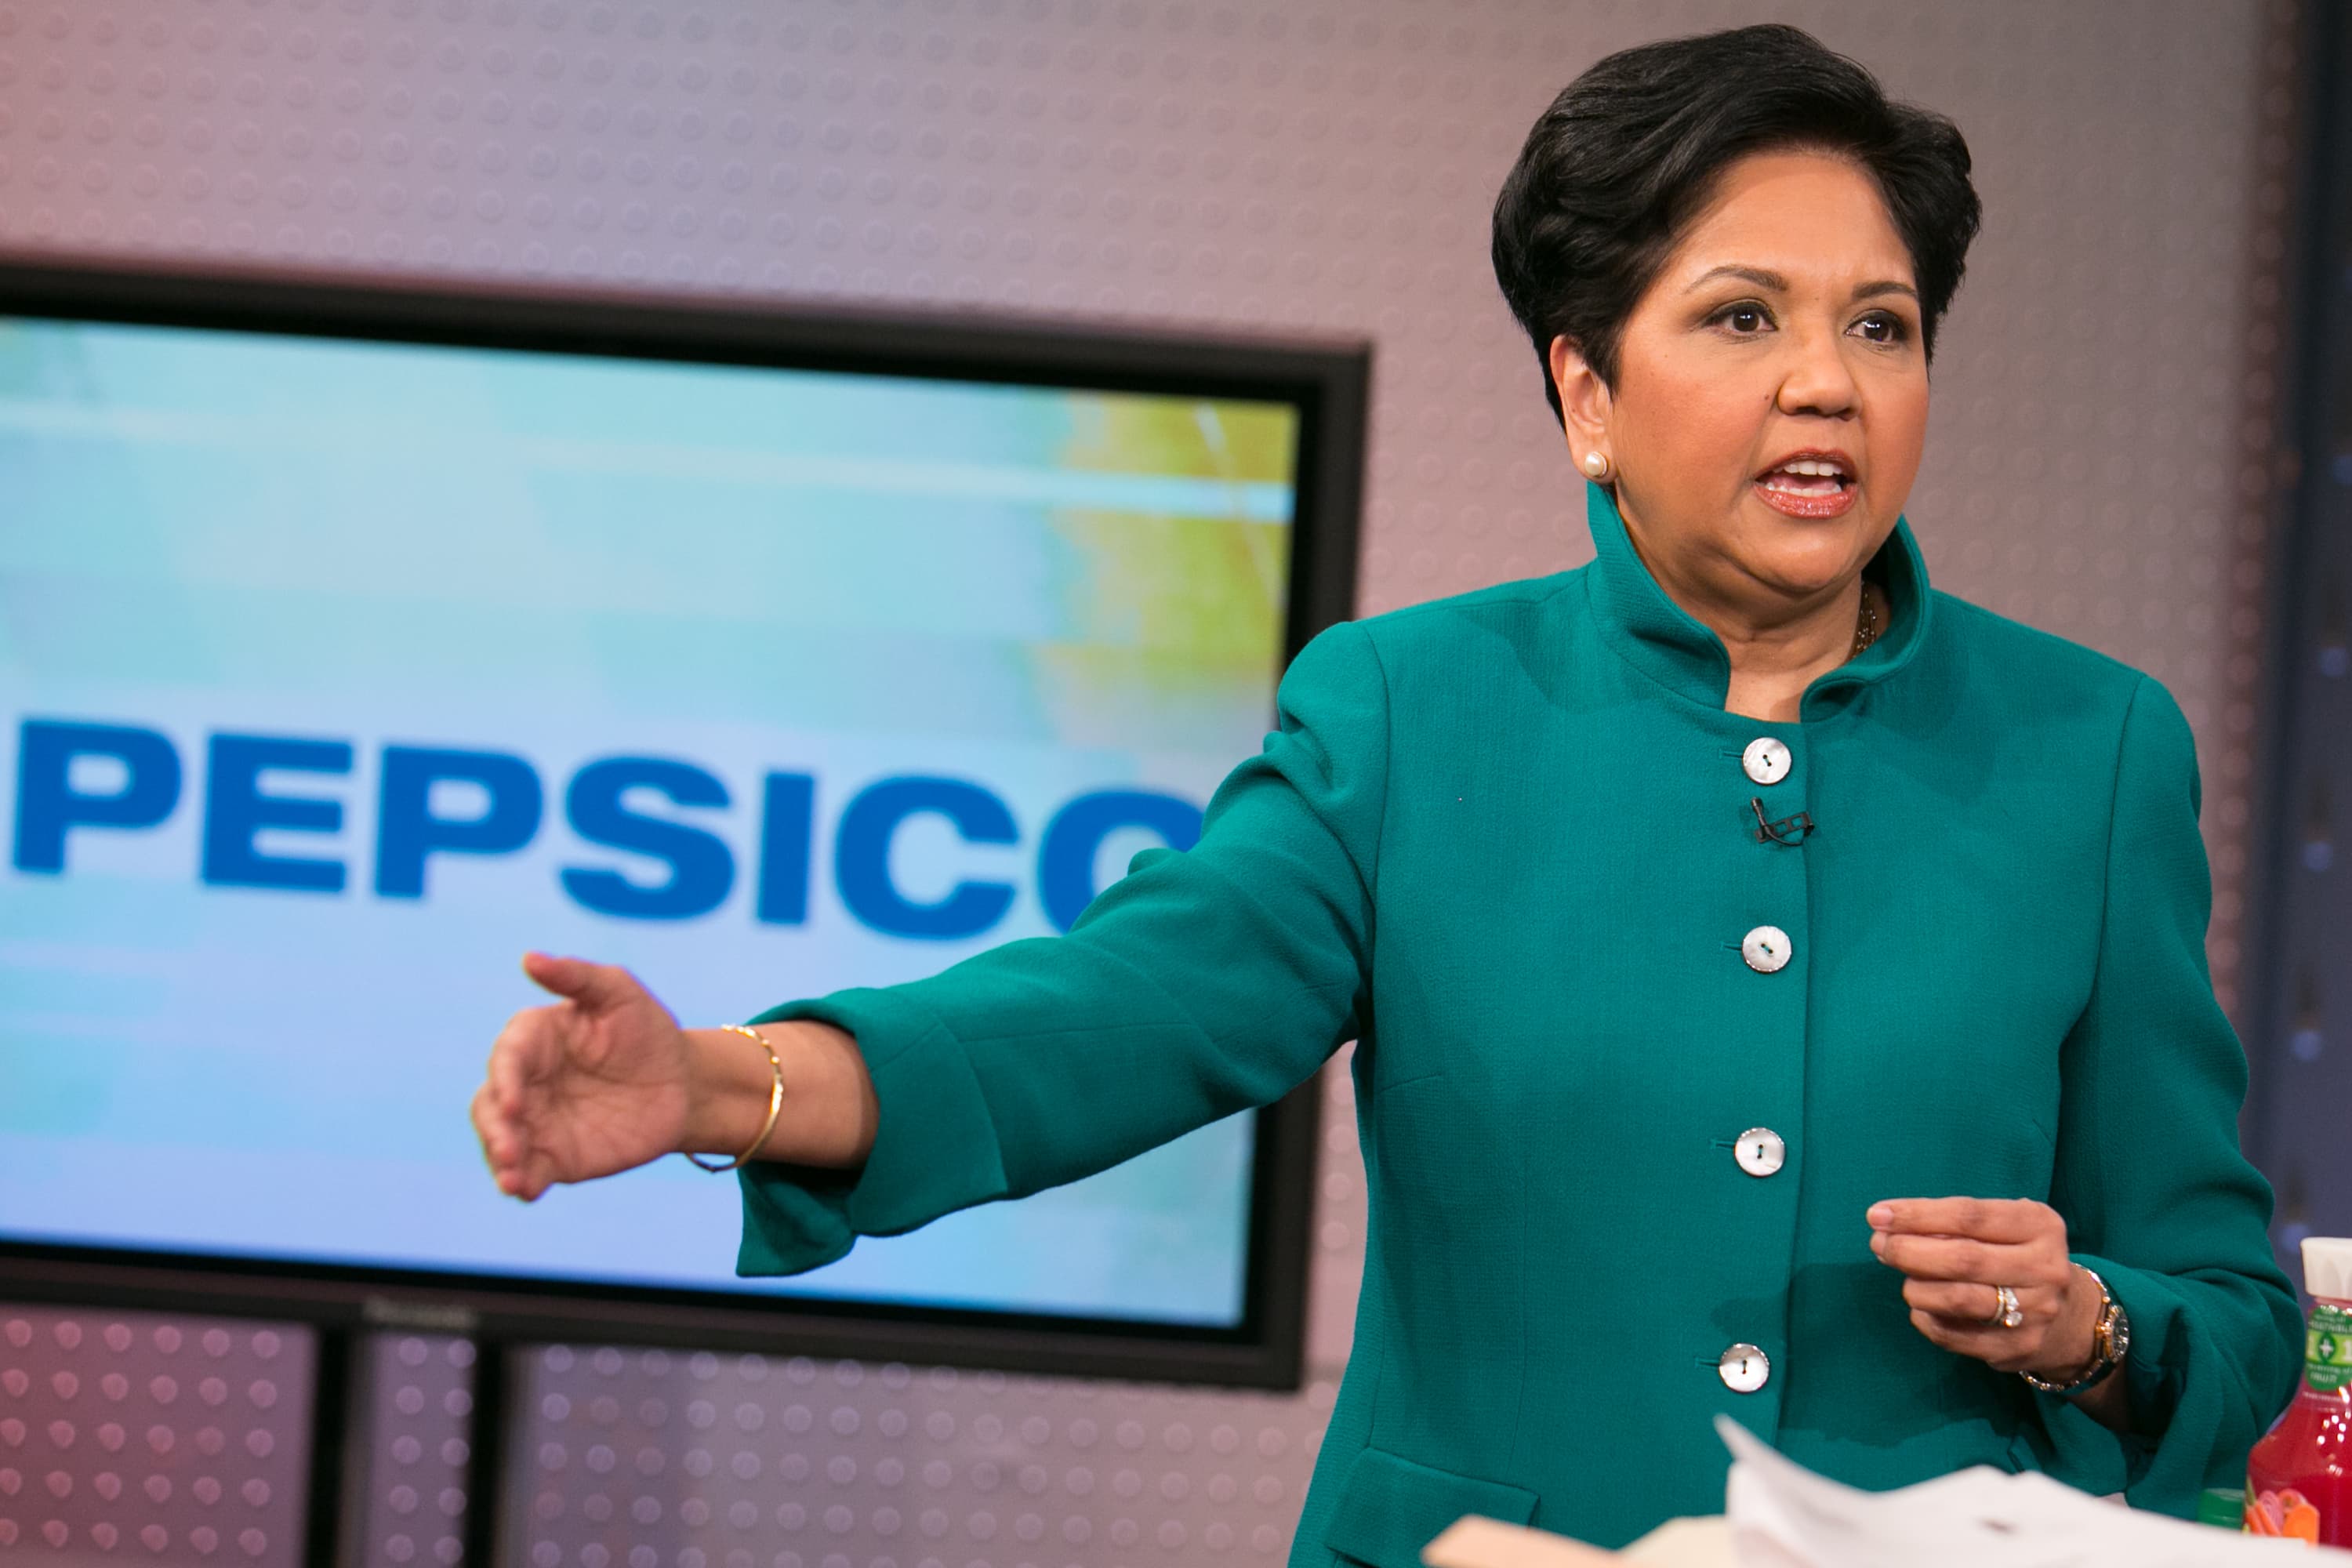 PepsiCo CEO Indra Nooyi: 5 habits that drove her success